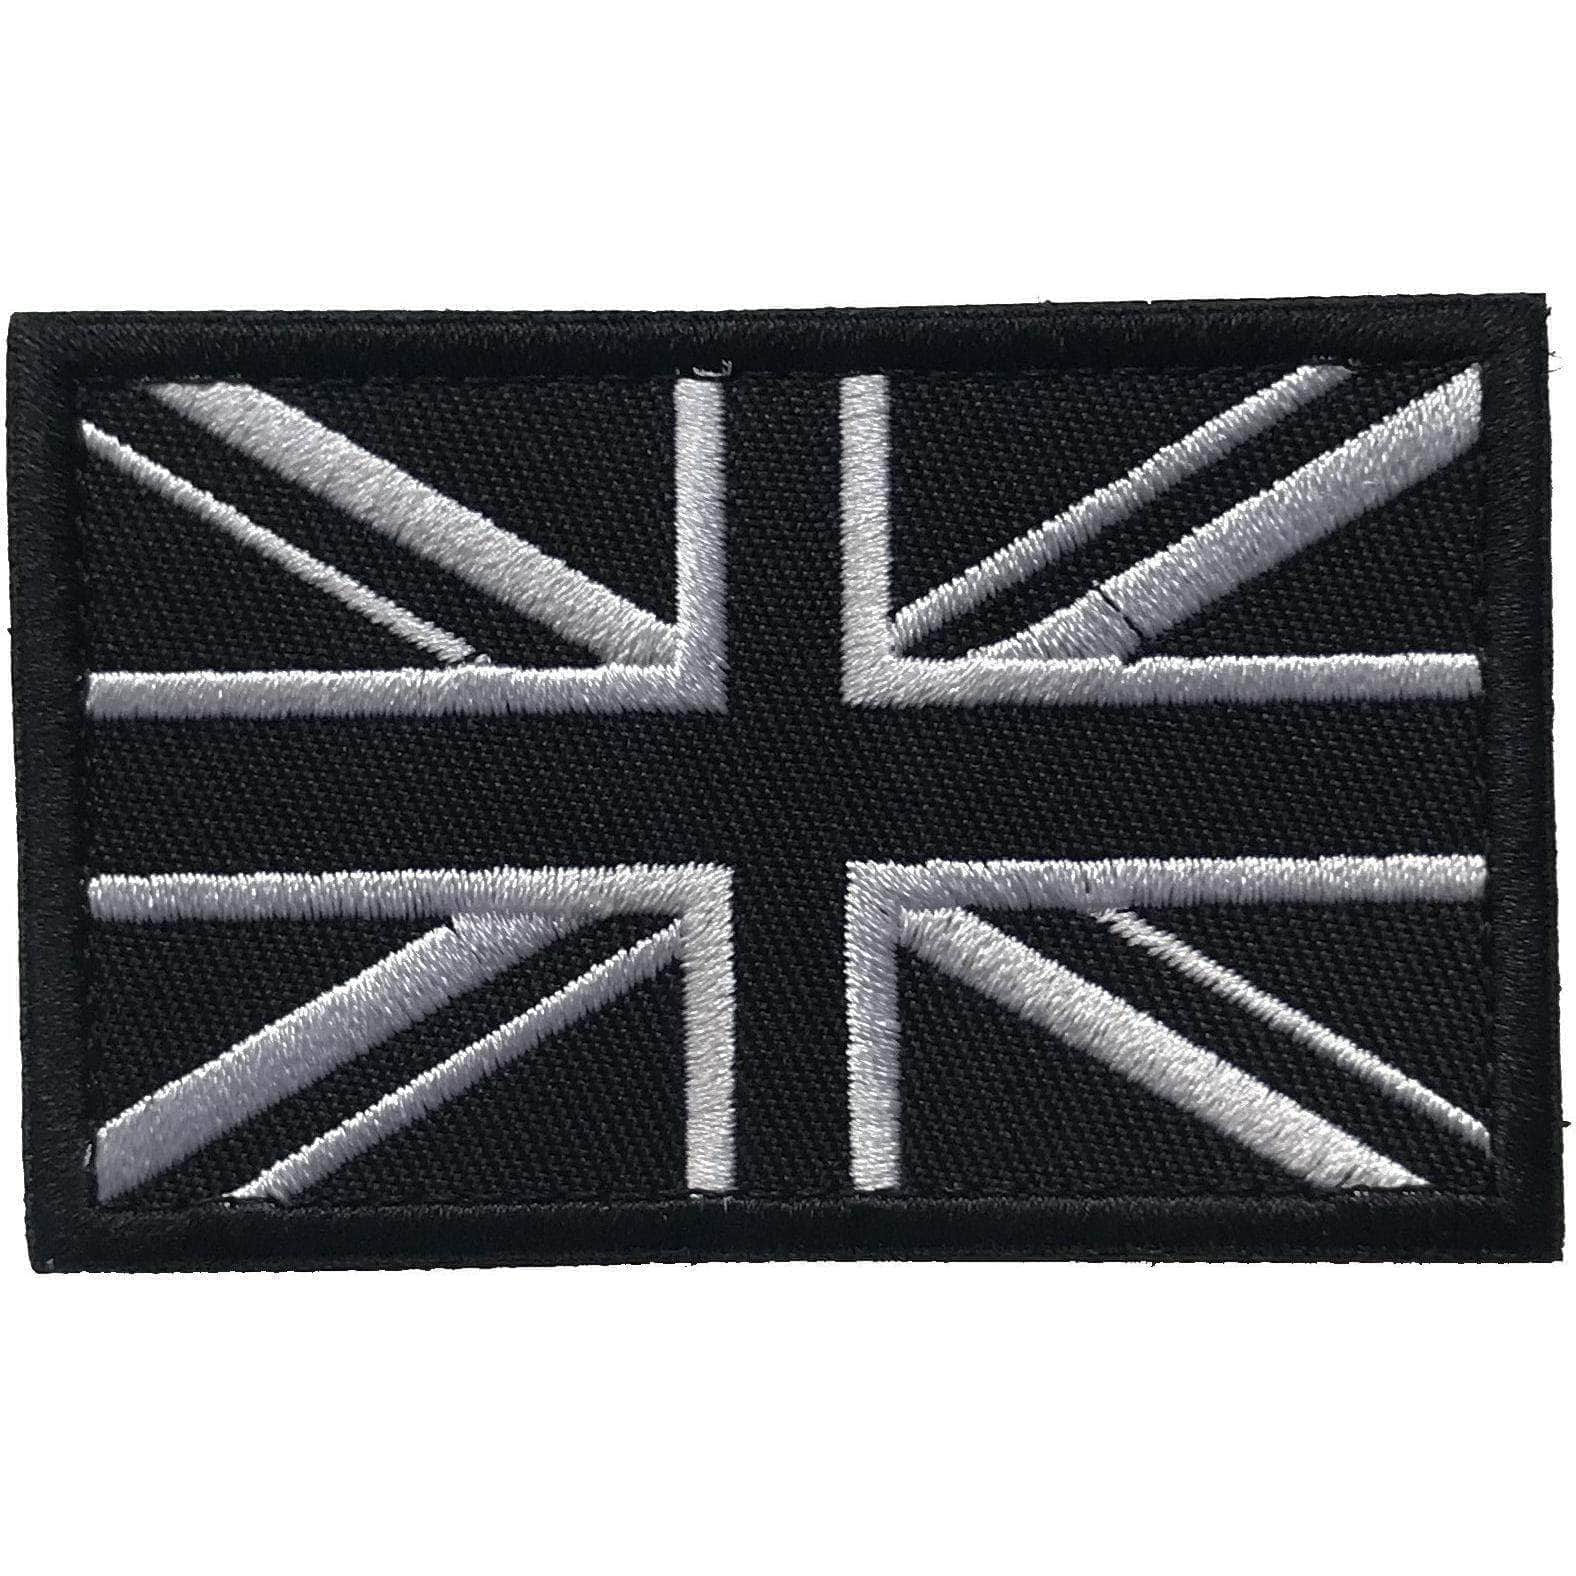 Built for Athletes Patches United Kingdom Flag Patch